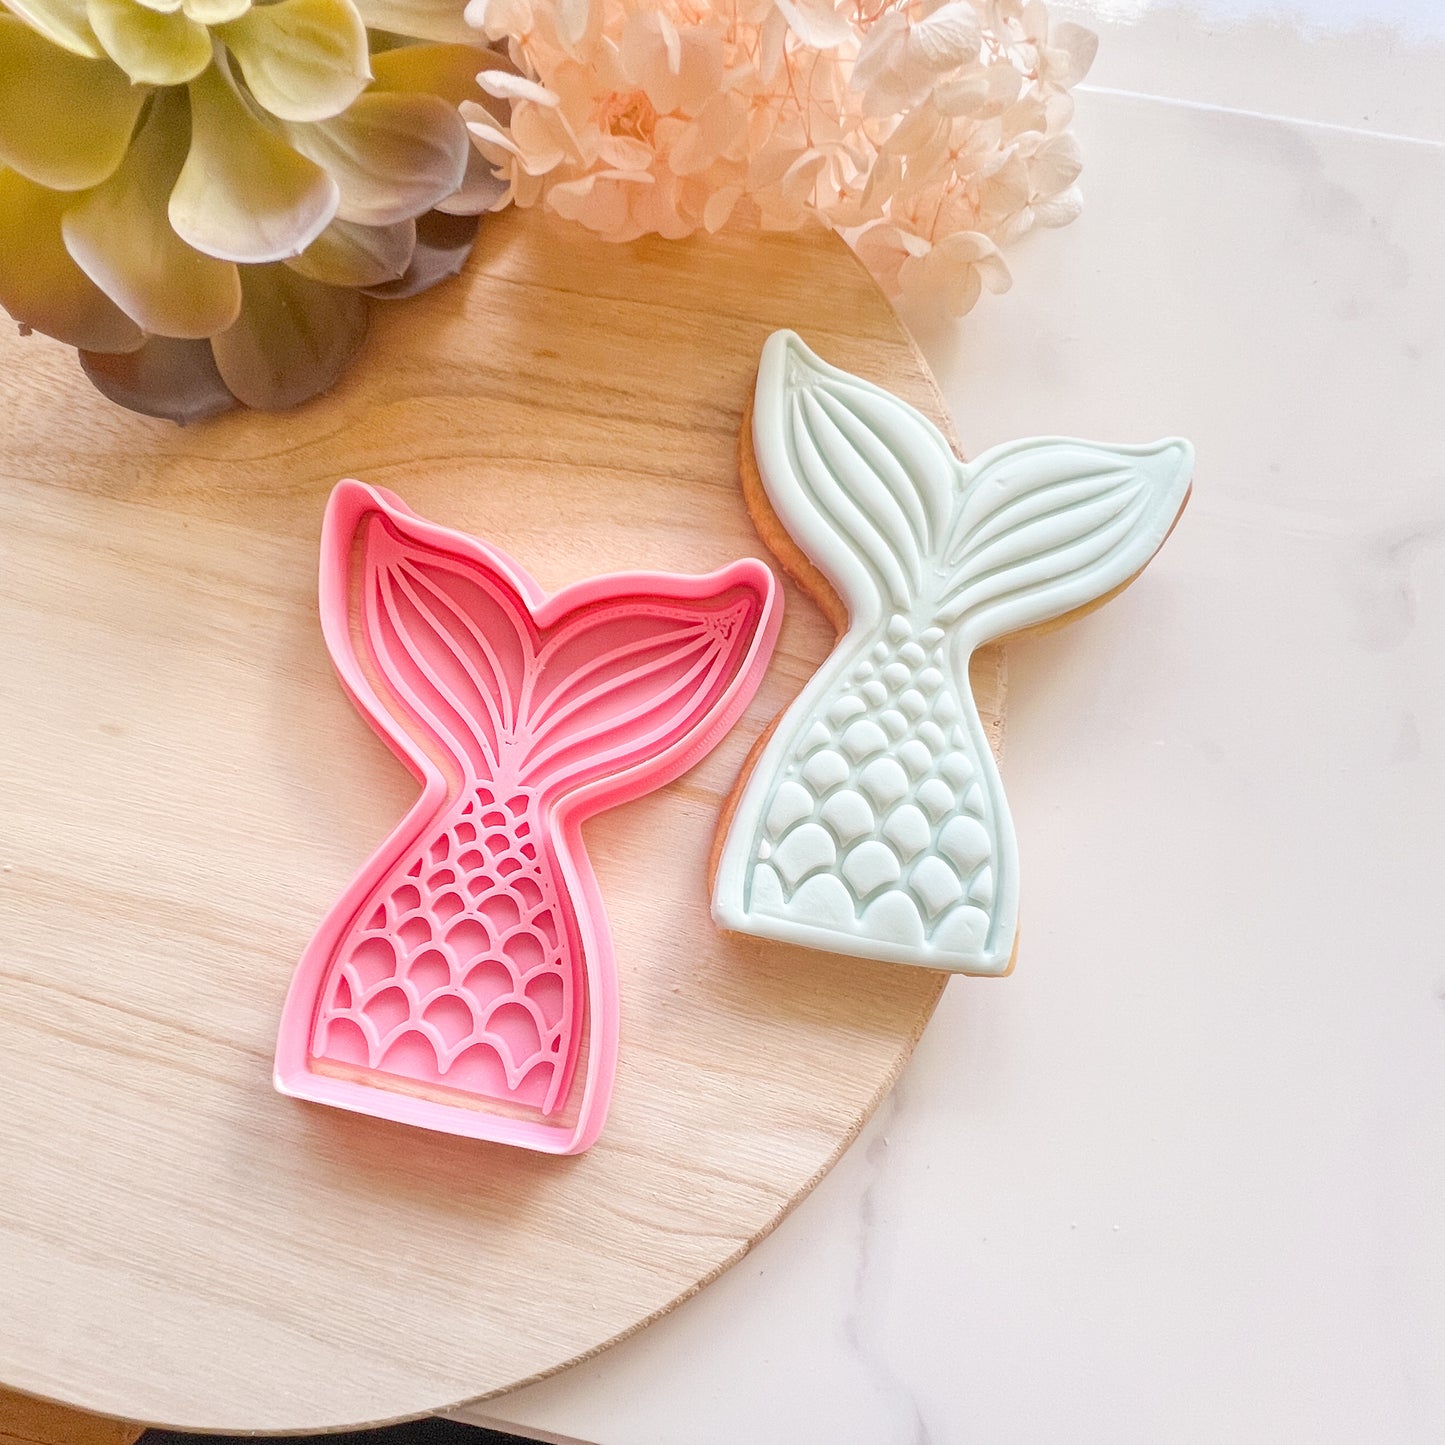 "Mermaid Tail" - Cookie Cutter & Stamp